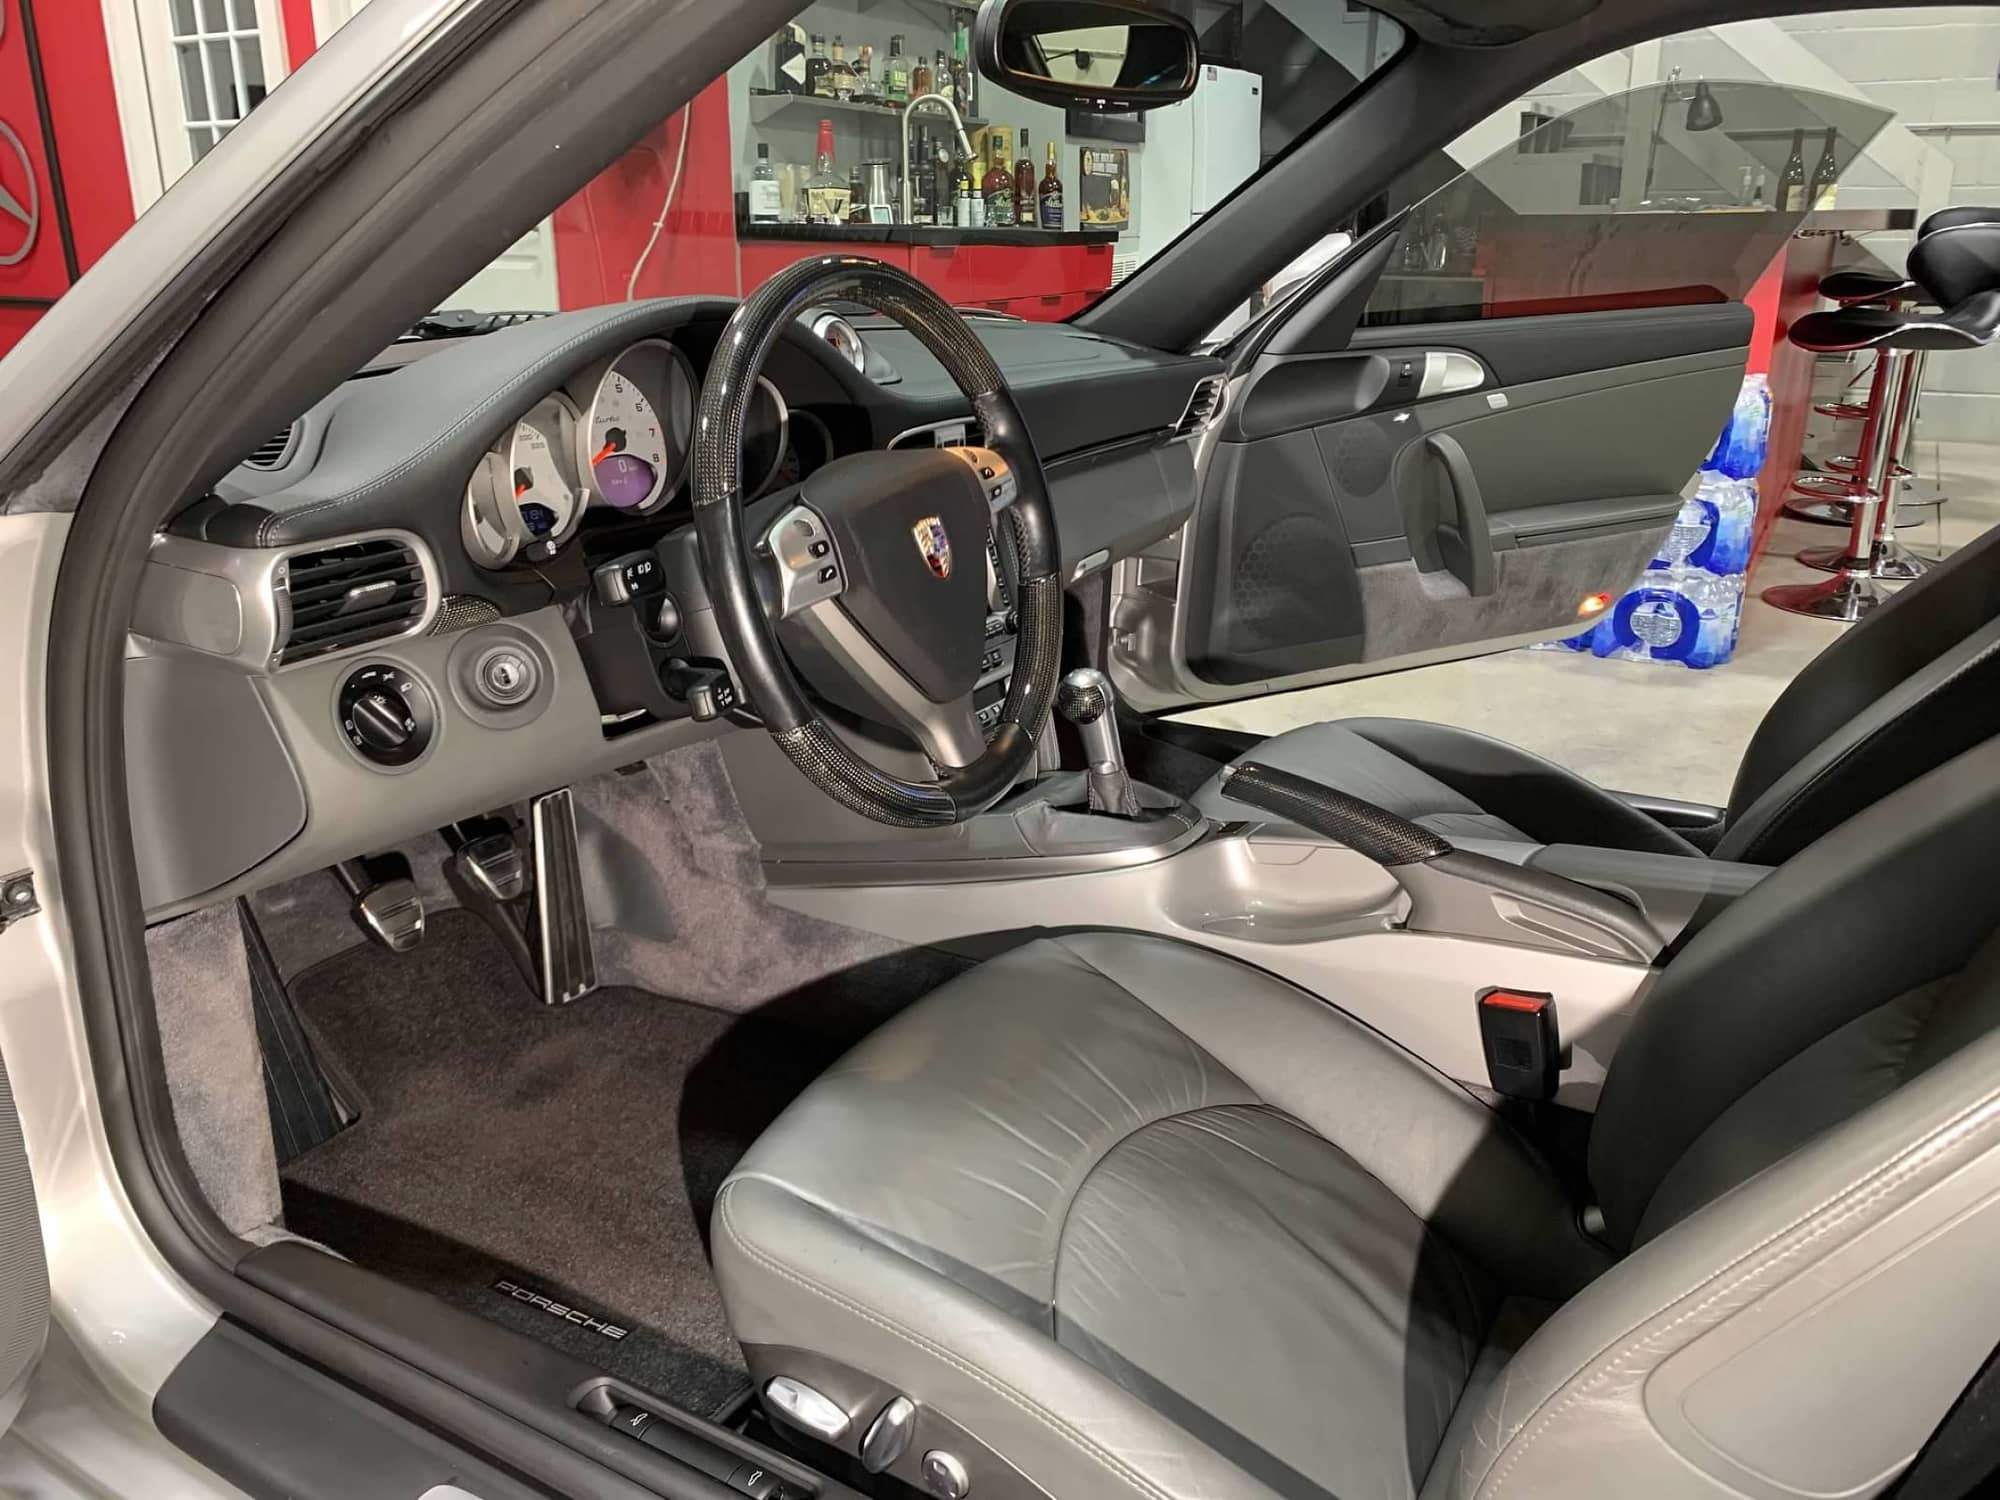 2007 Porsche 911 - 2007 Porsche 911 997 Turbo 6-Speed Manual - Used - VIN WP0AD29997S78359 - 17,122 Miles - 6 cyl - AWD - Manual - Coupe - Silver - Lexington, KY 40509, United States